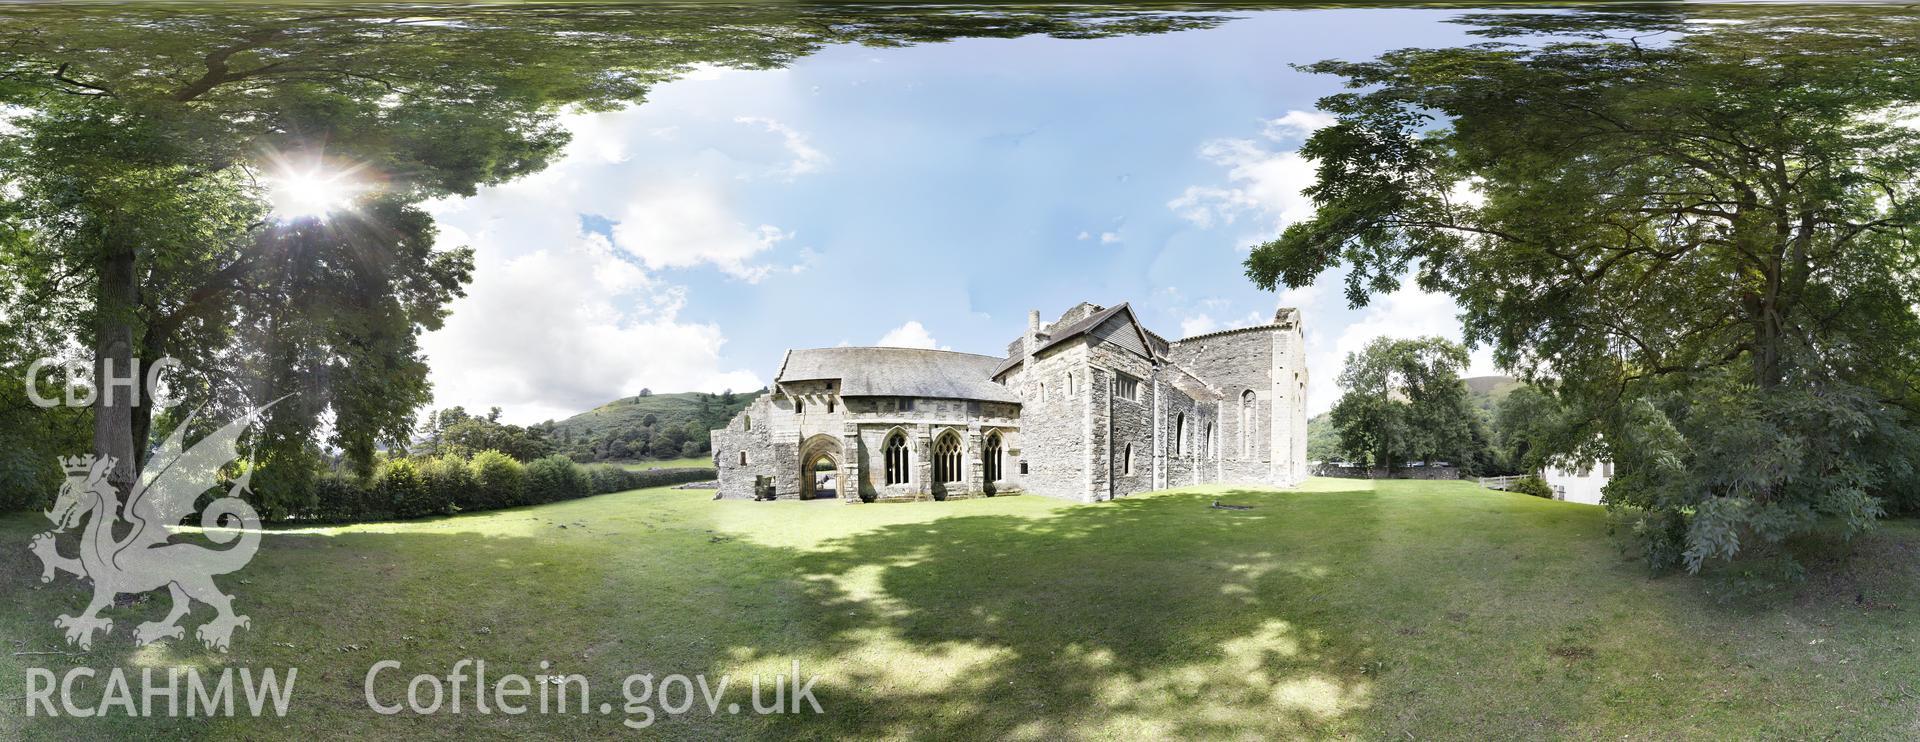 Reduced resolution .tiff file of stitched images to the rear of the Chapter House at Valle Crucis Abbey, carried out by Sue Fielding and Rita Singer, July 2017. Produced through European Travellers to Wales project.